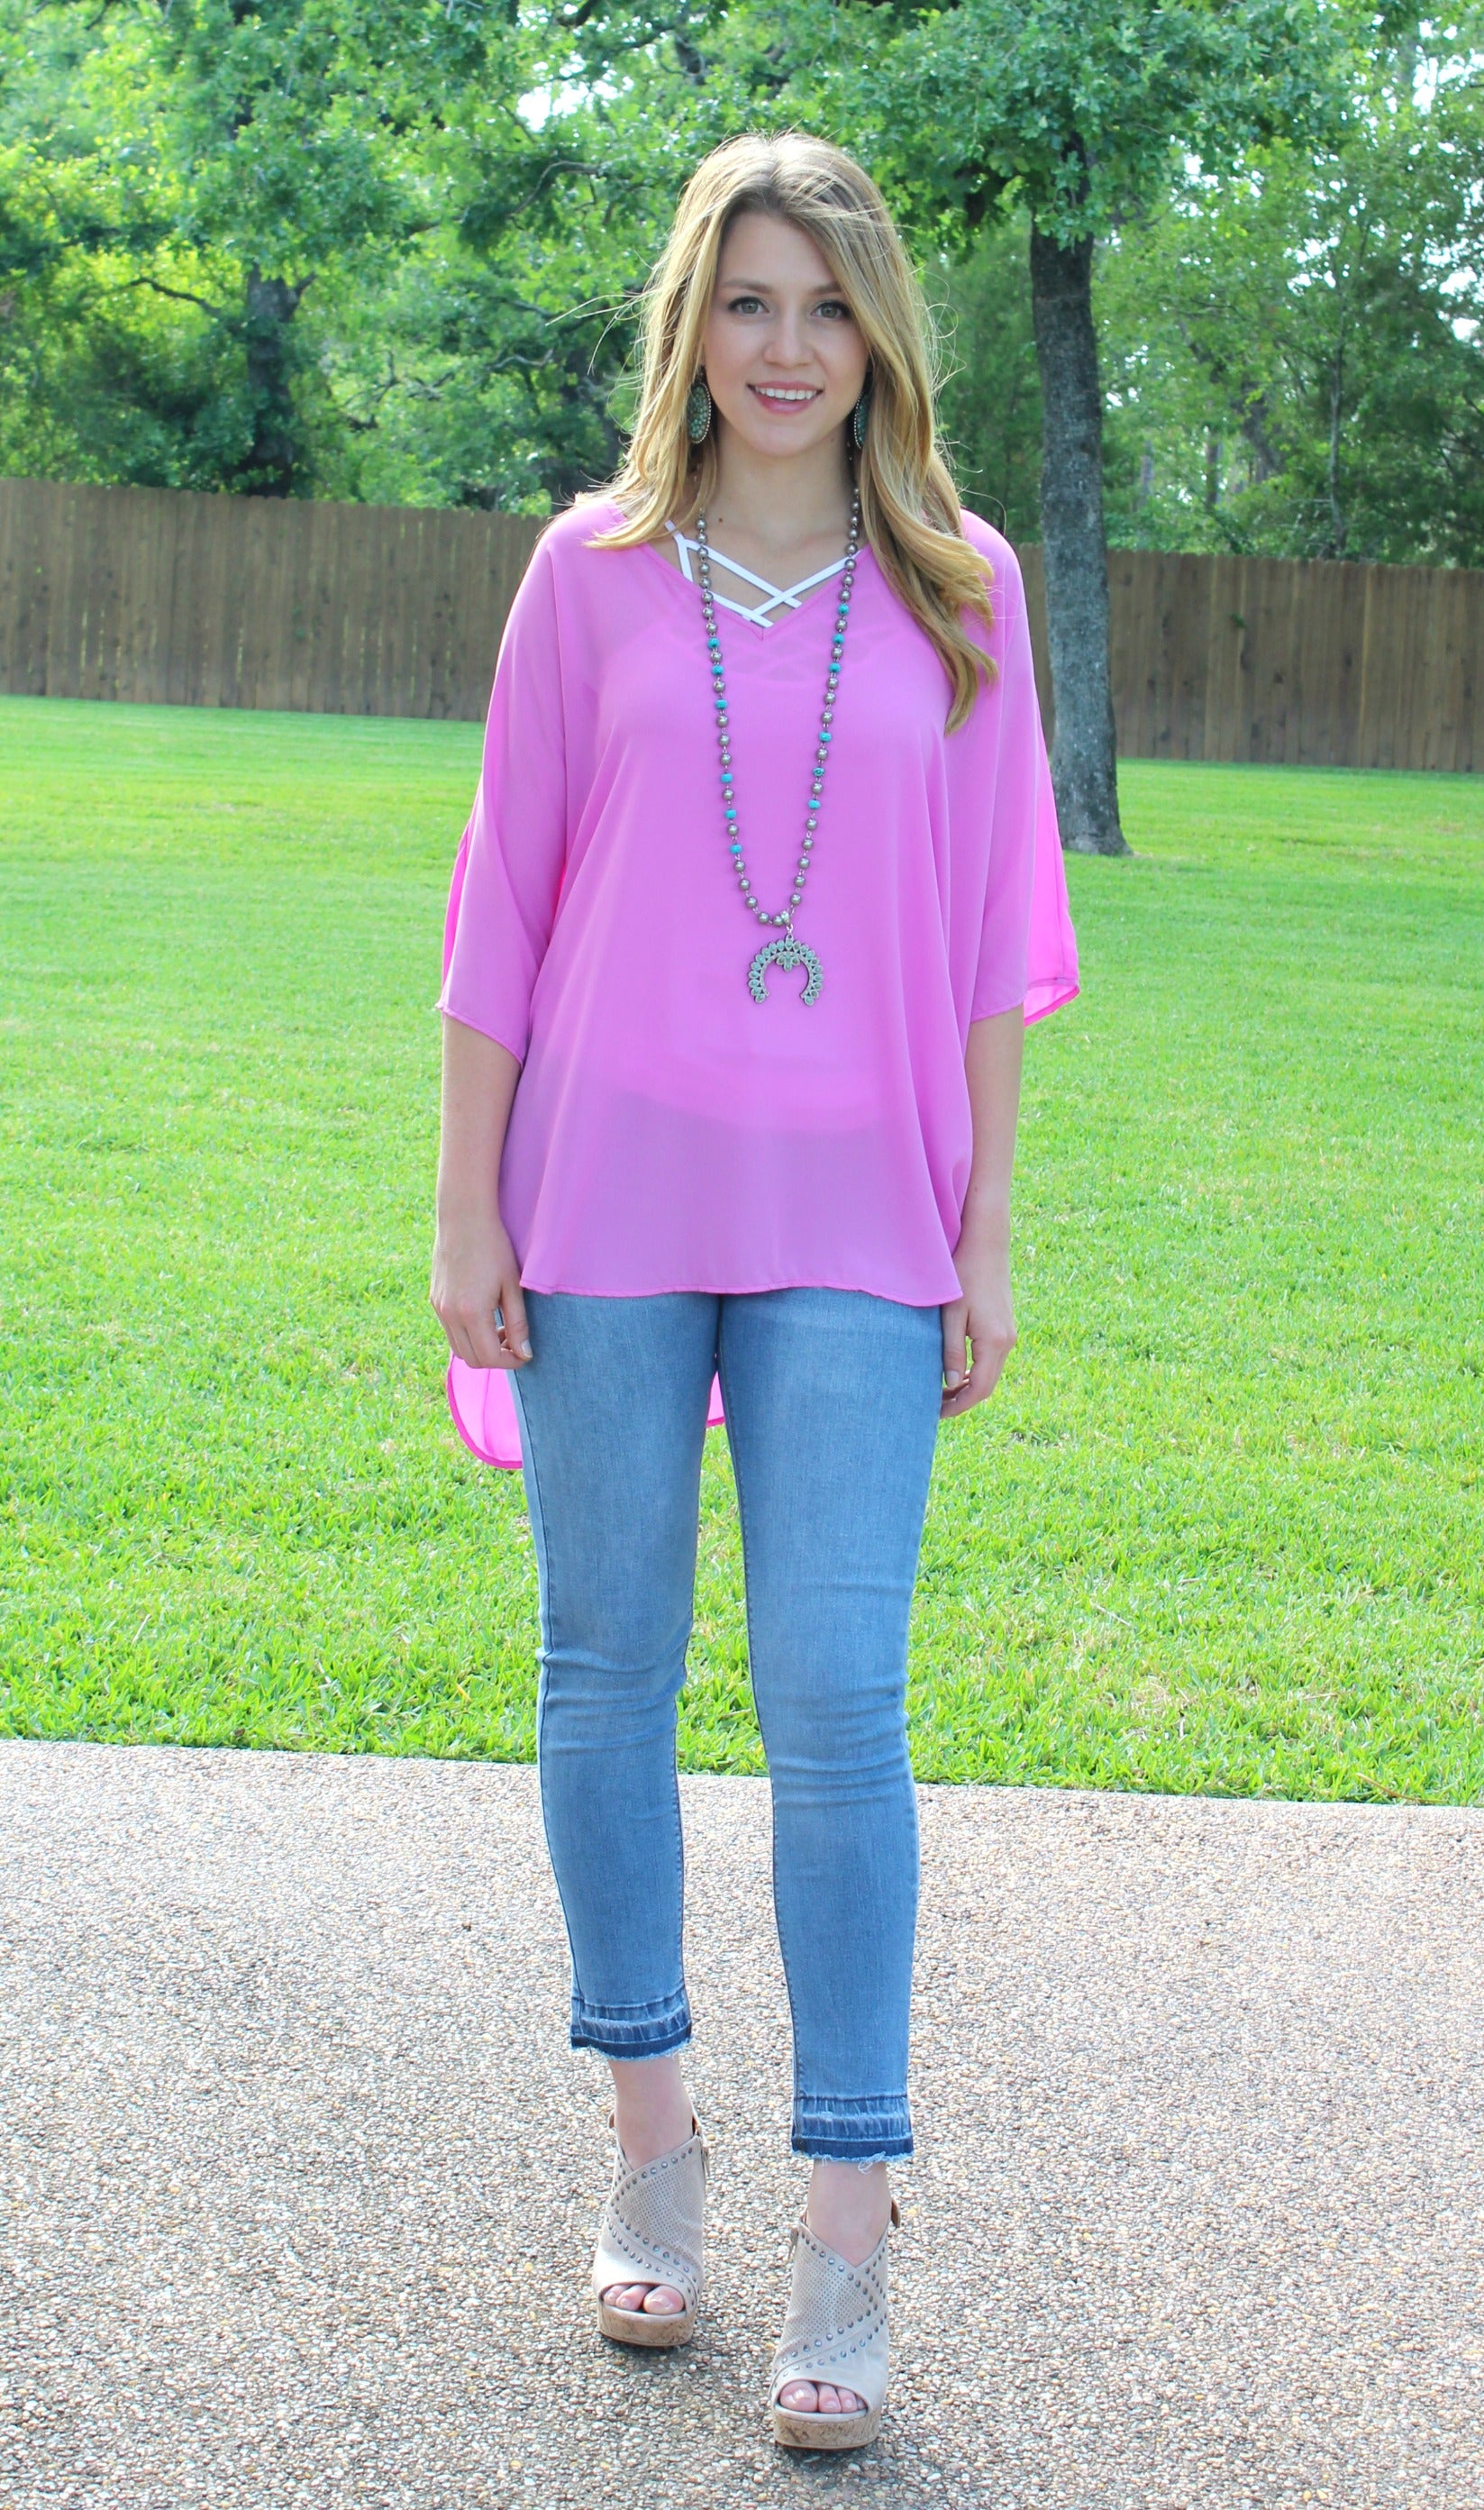 On The Line Sheer Oversized Poncho Top in Orchid - Giddy Up Glamour Boutique